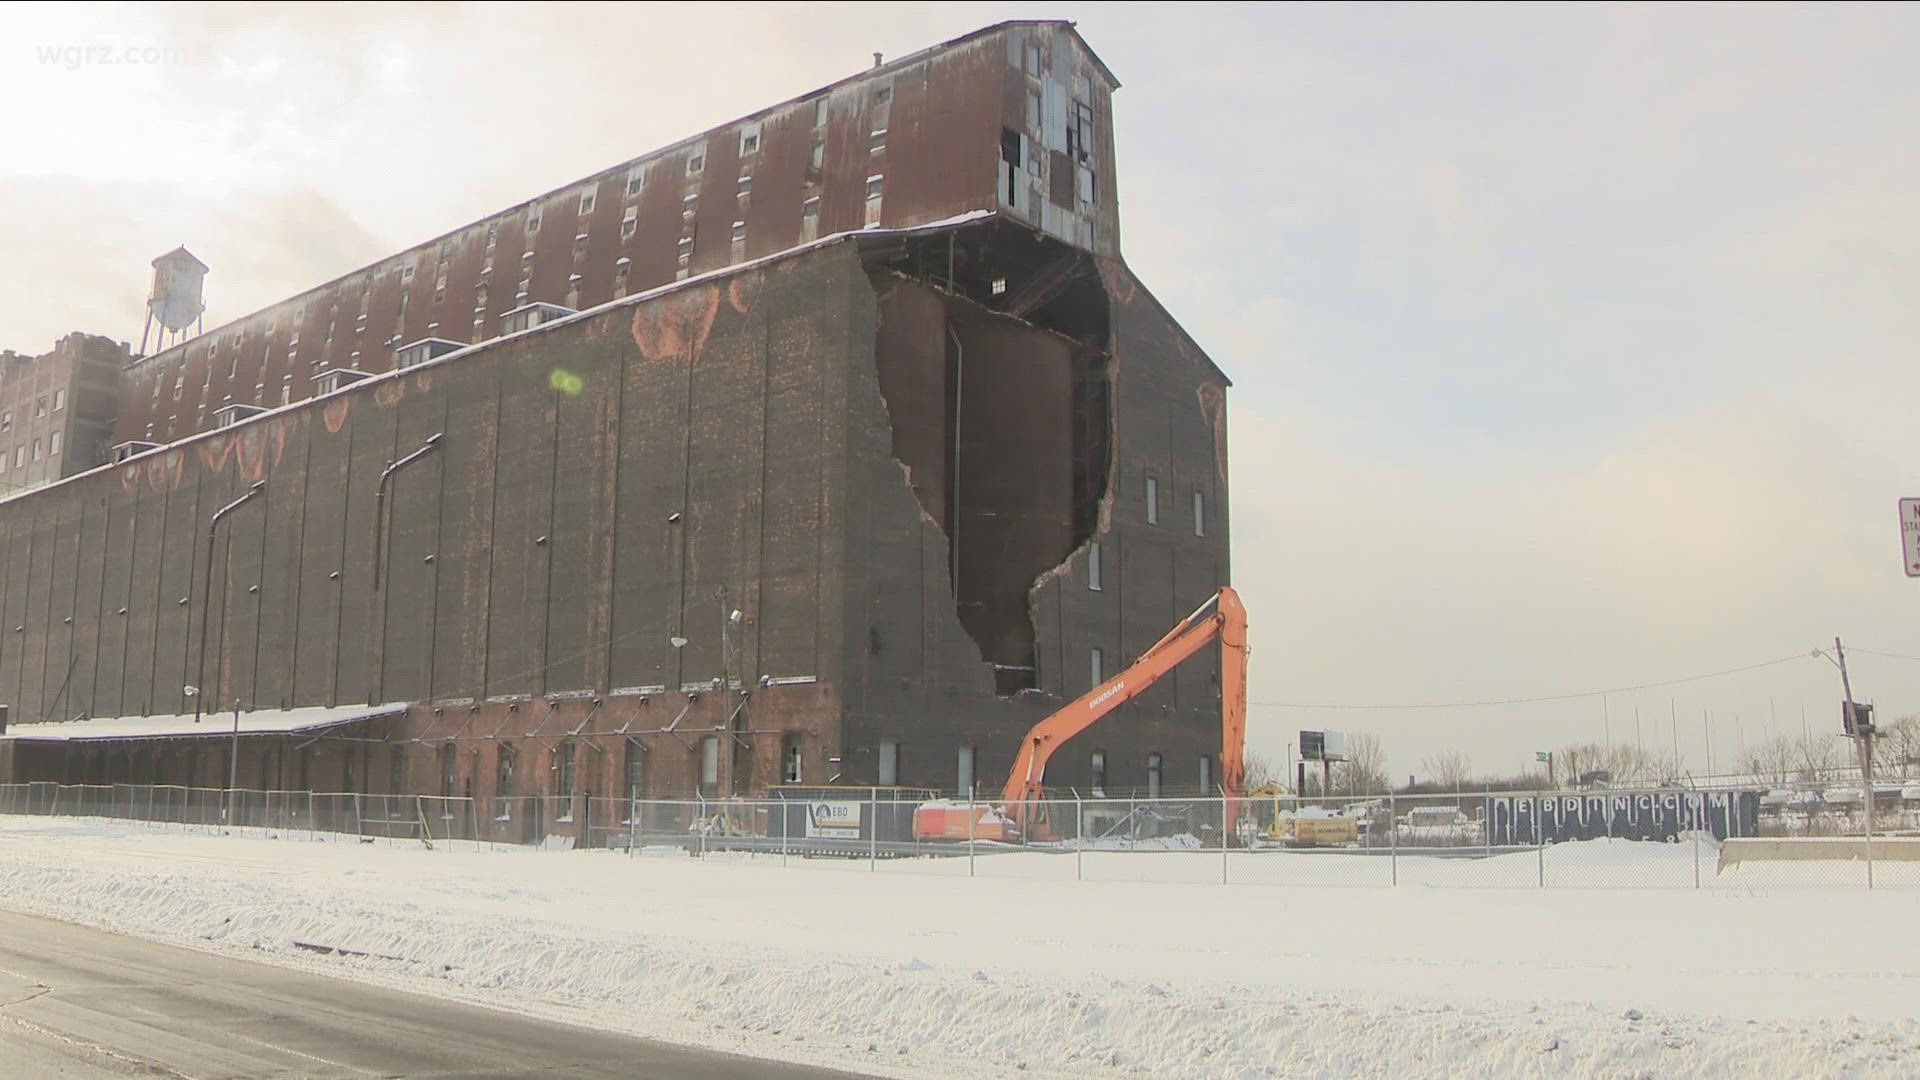 New developments for the Great Northern Grain Elevator keeps it standing, at least for now.